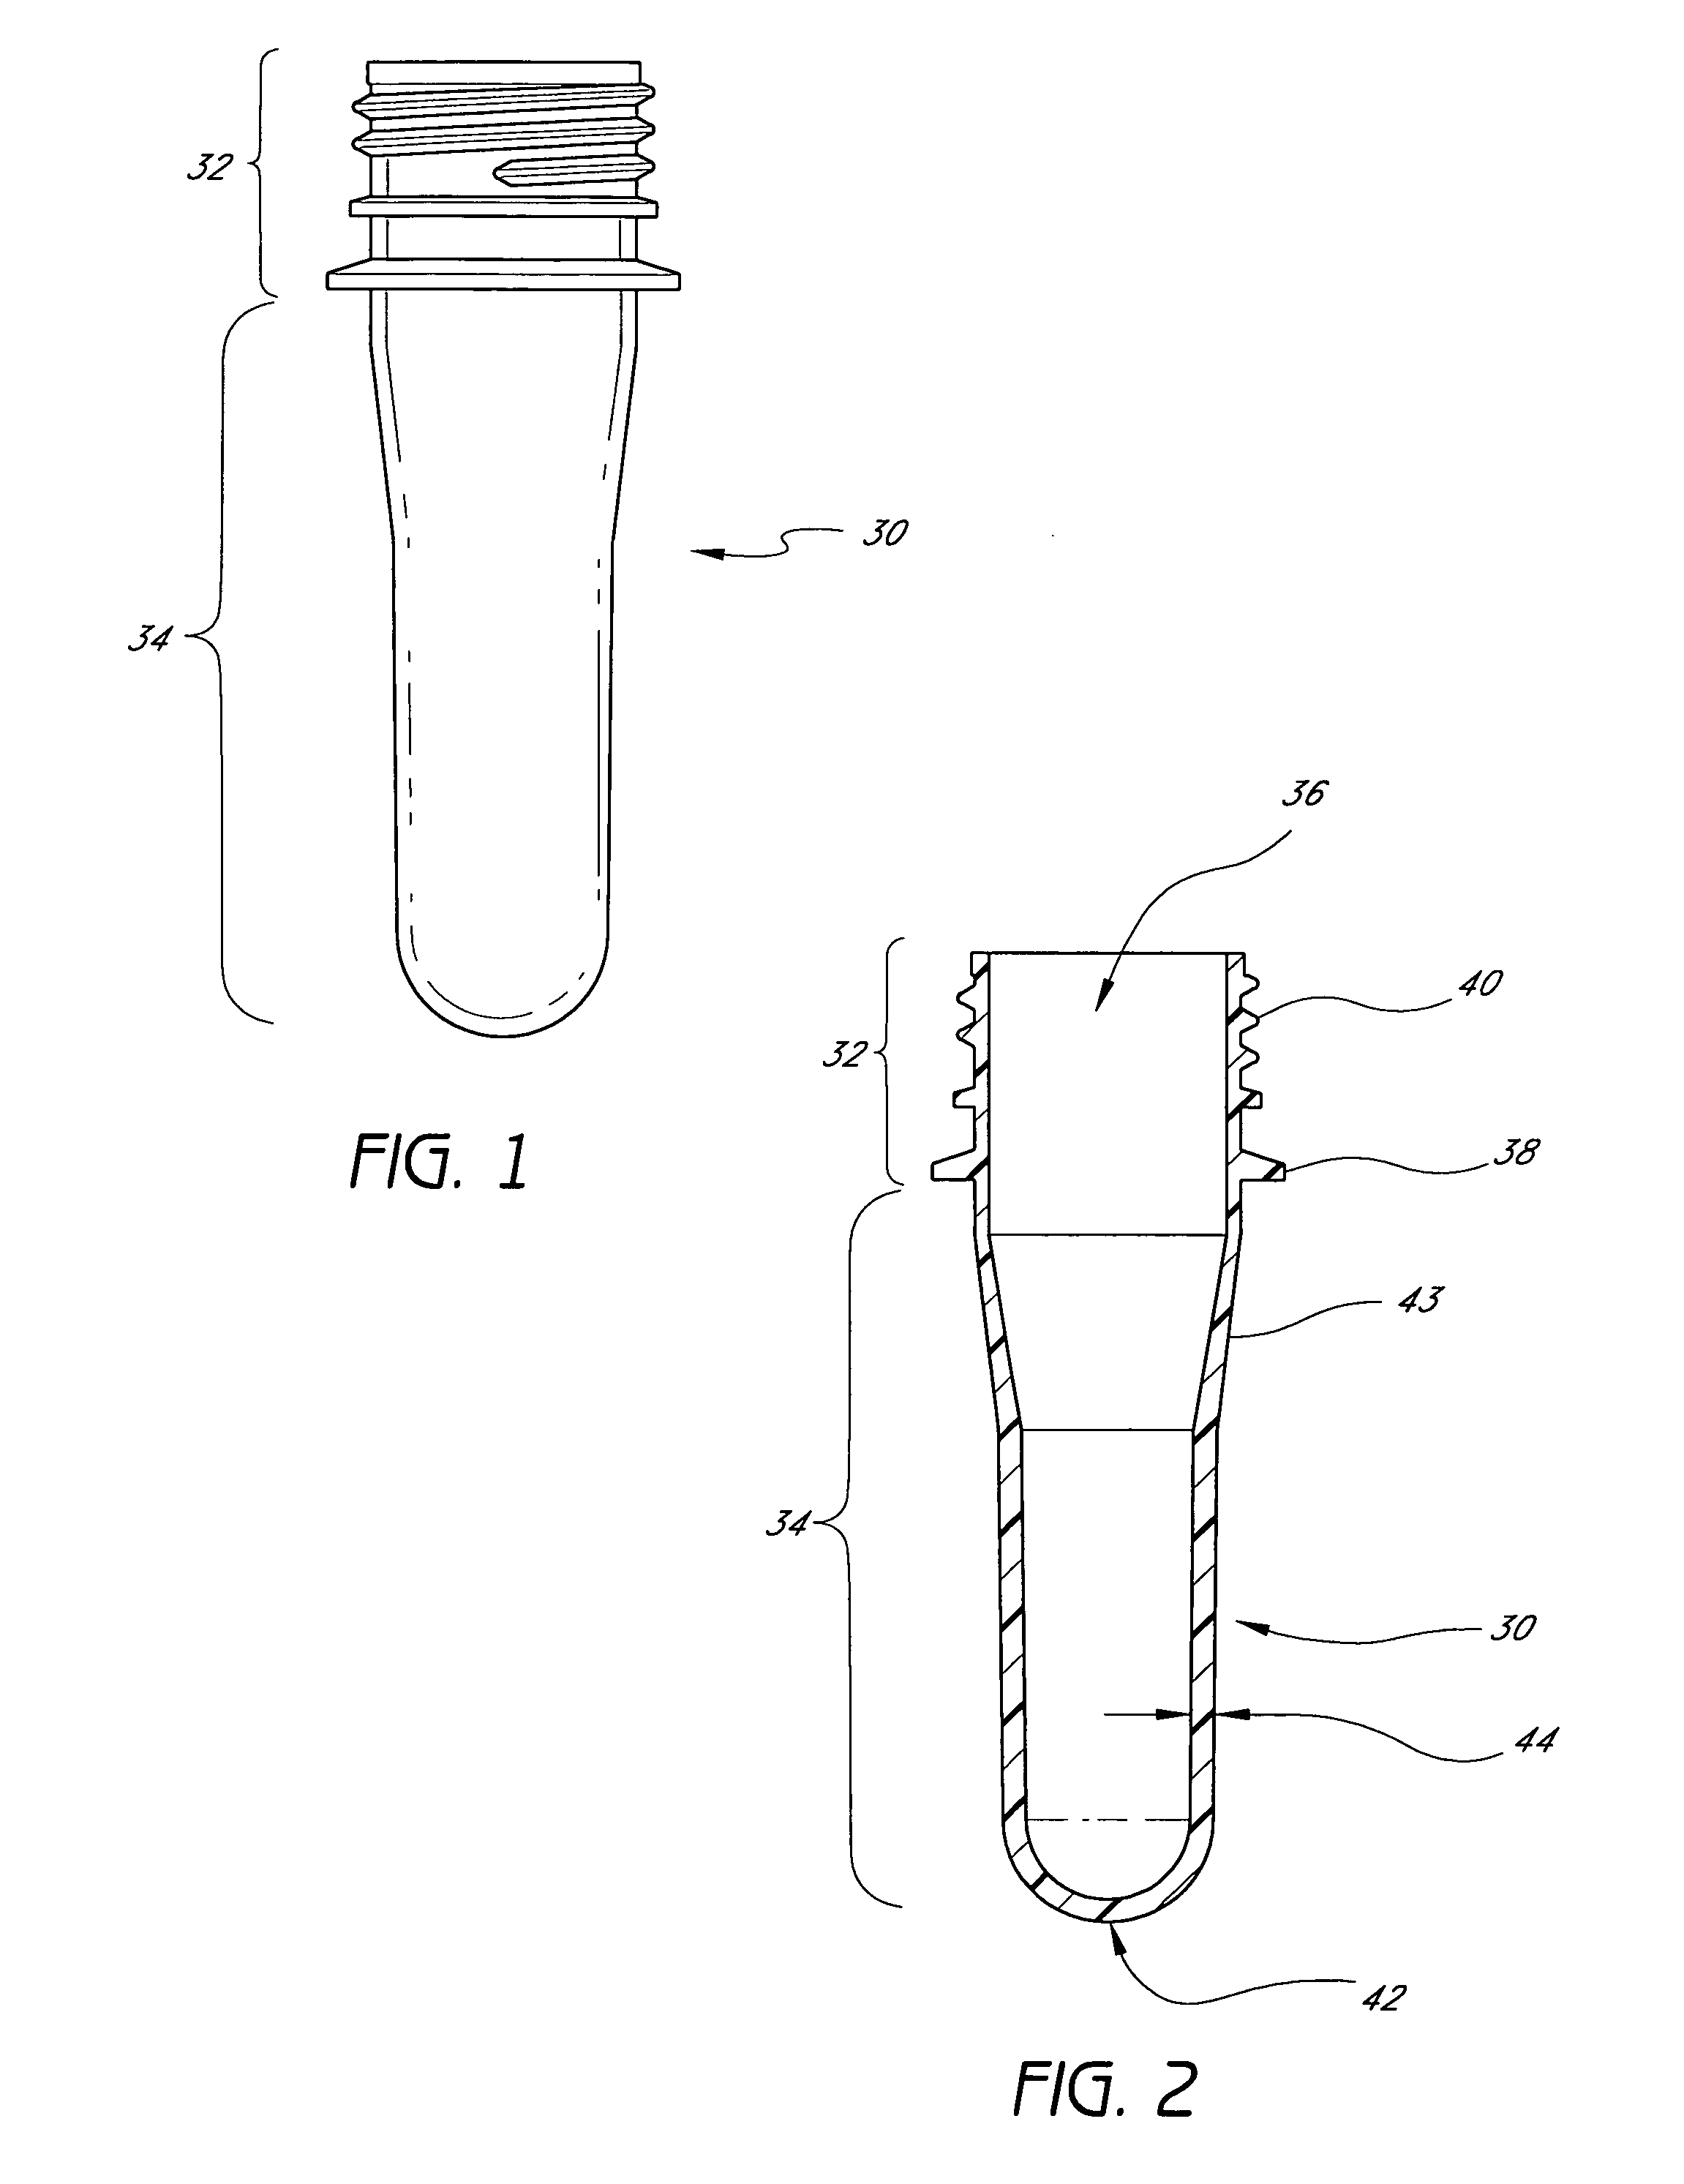 Mono and multi-layer articles and injection molding methods of making the same